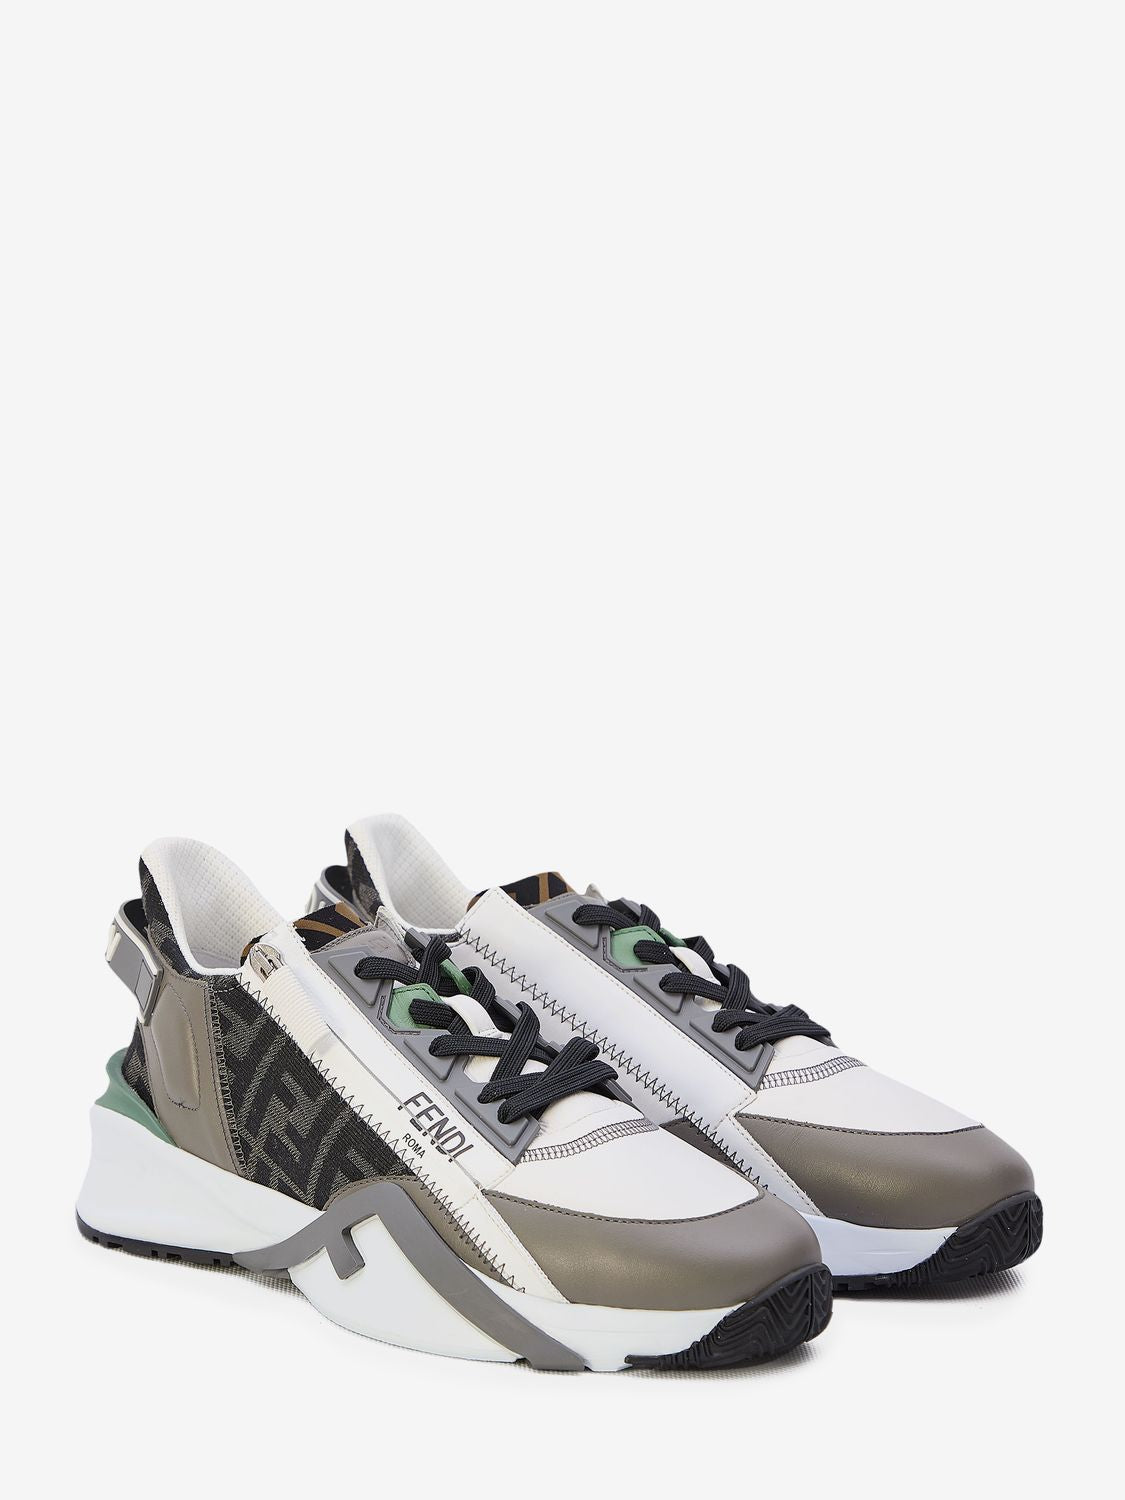 FENDI White and Grey Leather Sneakers with Black FF Inserts for Men